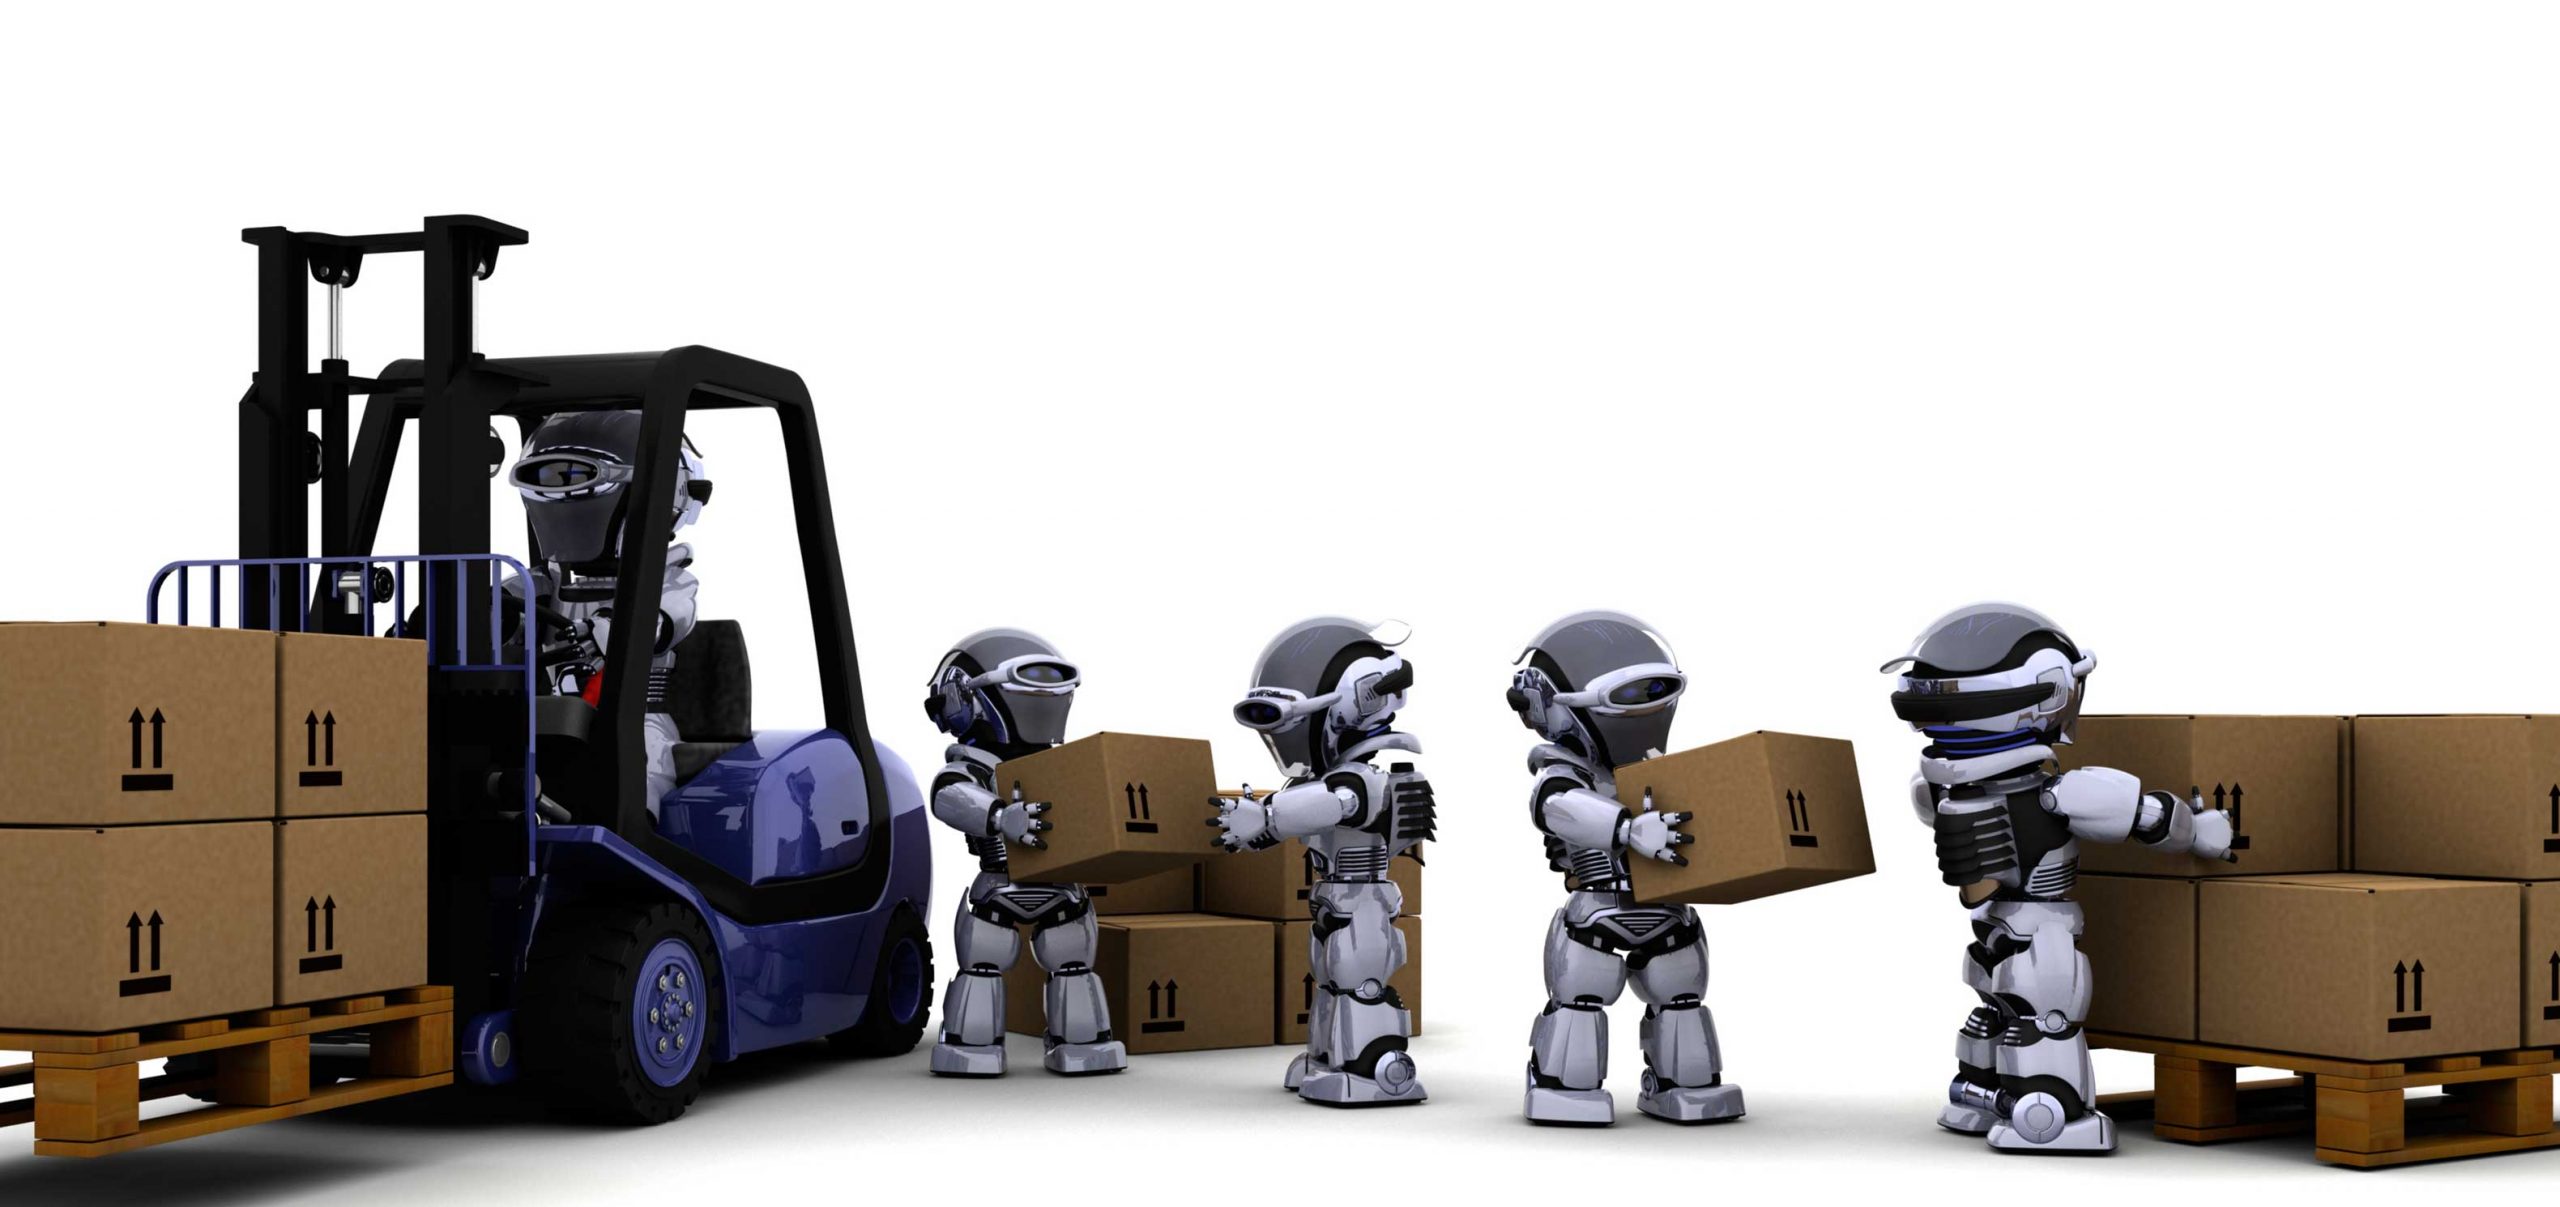 Delivery 2020 – where will technology take us?